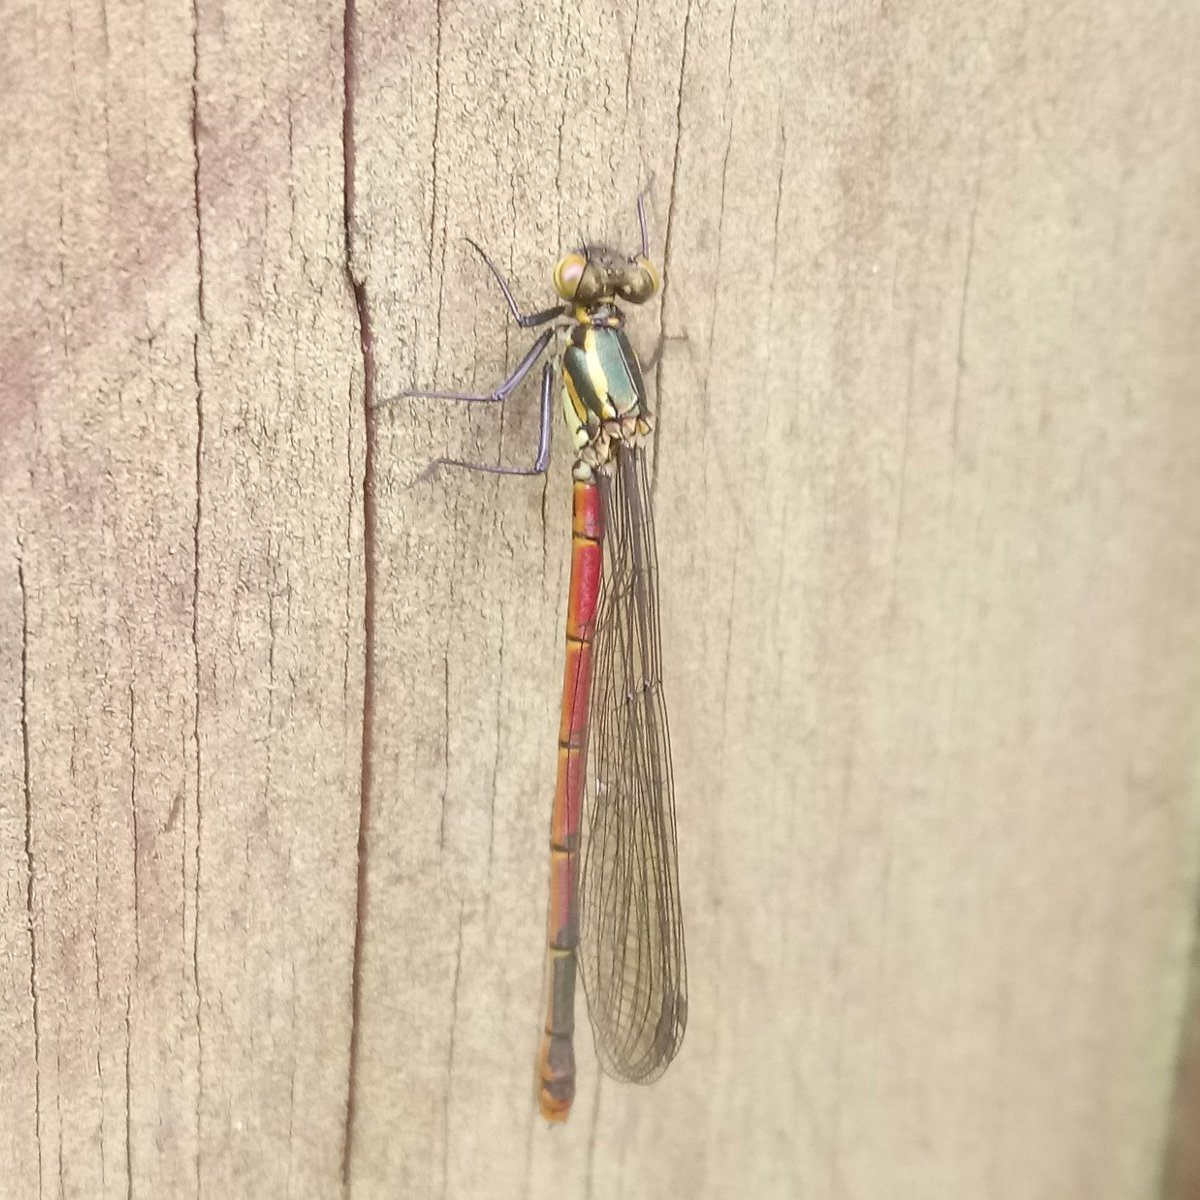 My first damselfly of the year @DWTBrownsea